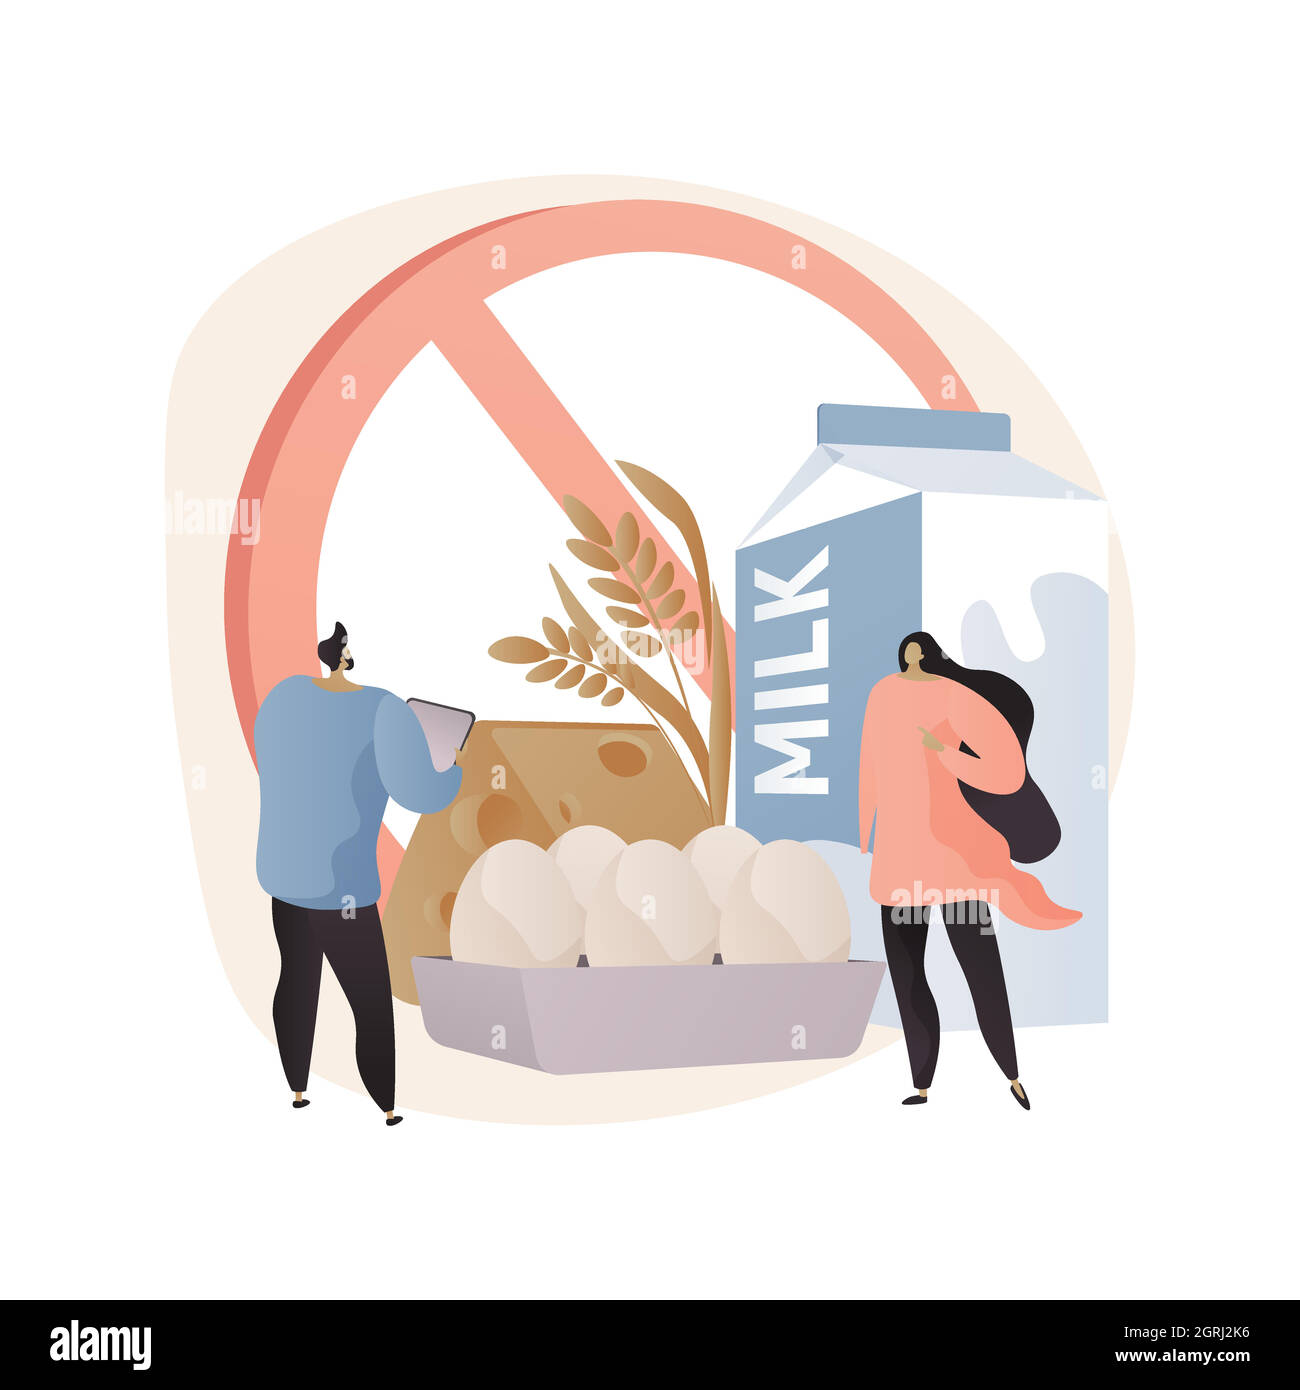 Food allergy abstract concept vector illustration. Stock Vector